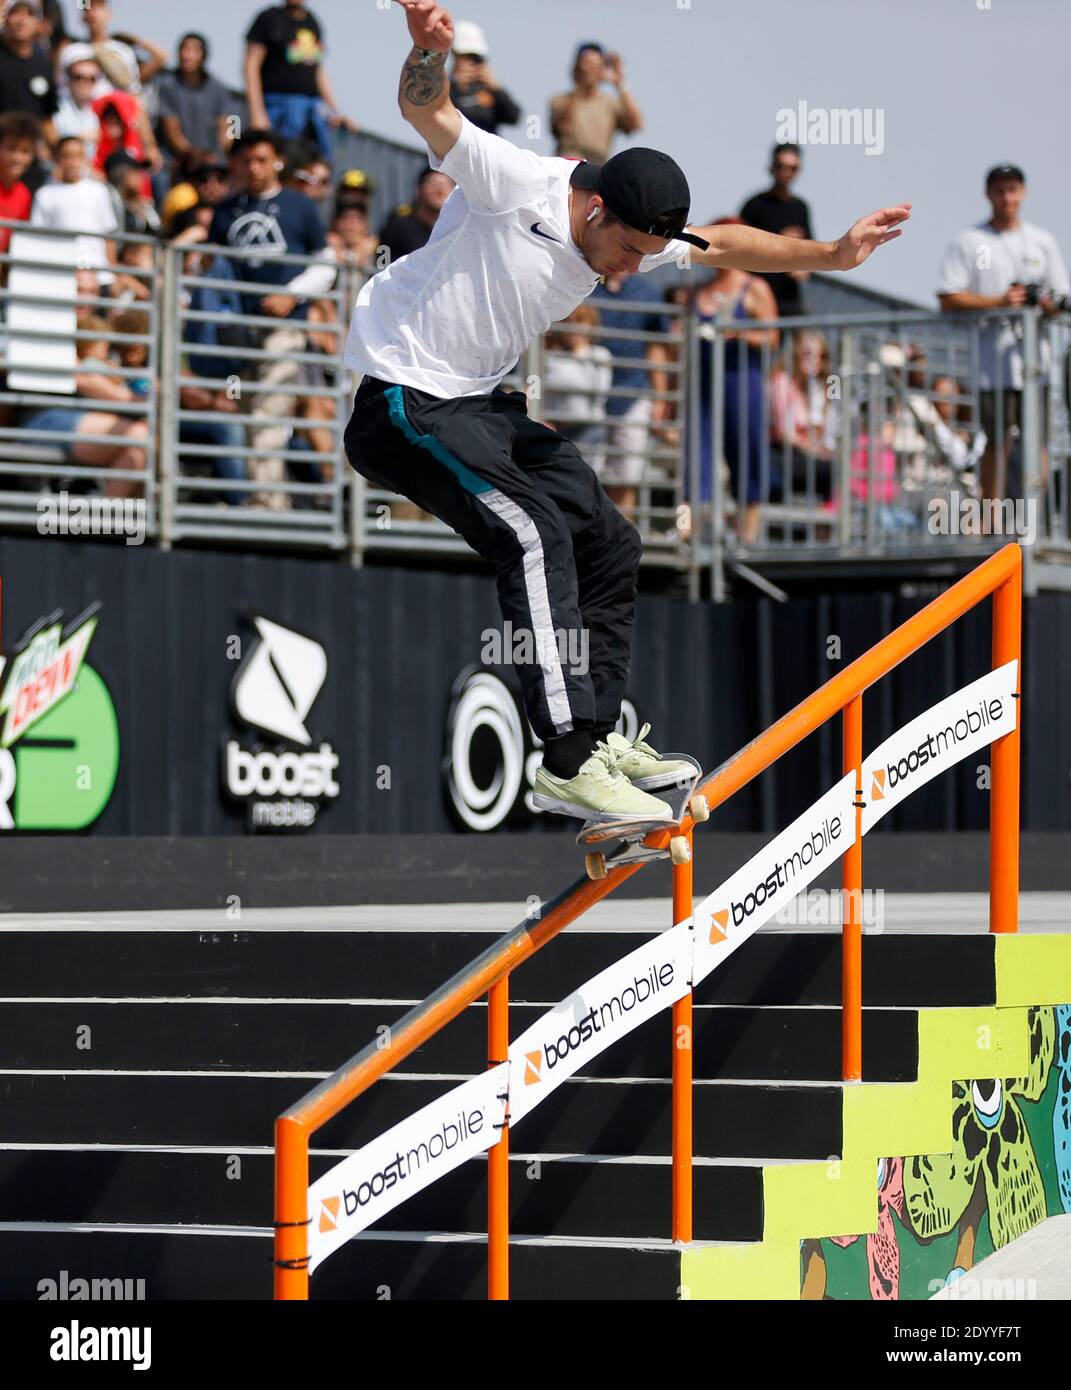 Beijing, USA. 16th June, 2019. Aurelien Giraud of France skates during the men's street final during the 2019 Dew Tour skateboard competition in Long Beach, the United States, June 16, 2019. On December 7, breaking, skateboarding, sport climbing, and surfing were confirmed as additional sports to be added to the 2024 Paris Olympic Games. Weightlifting had four events removed from the Paris 2024 program, with its quota reduced to 120 athletes from 196 at Tokyo 2020. Credit: Li Ying/Xinhua/Alamy Live News Stock Photo